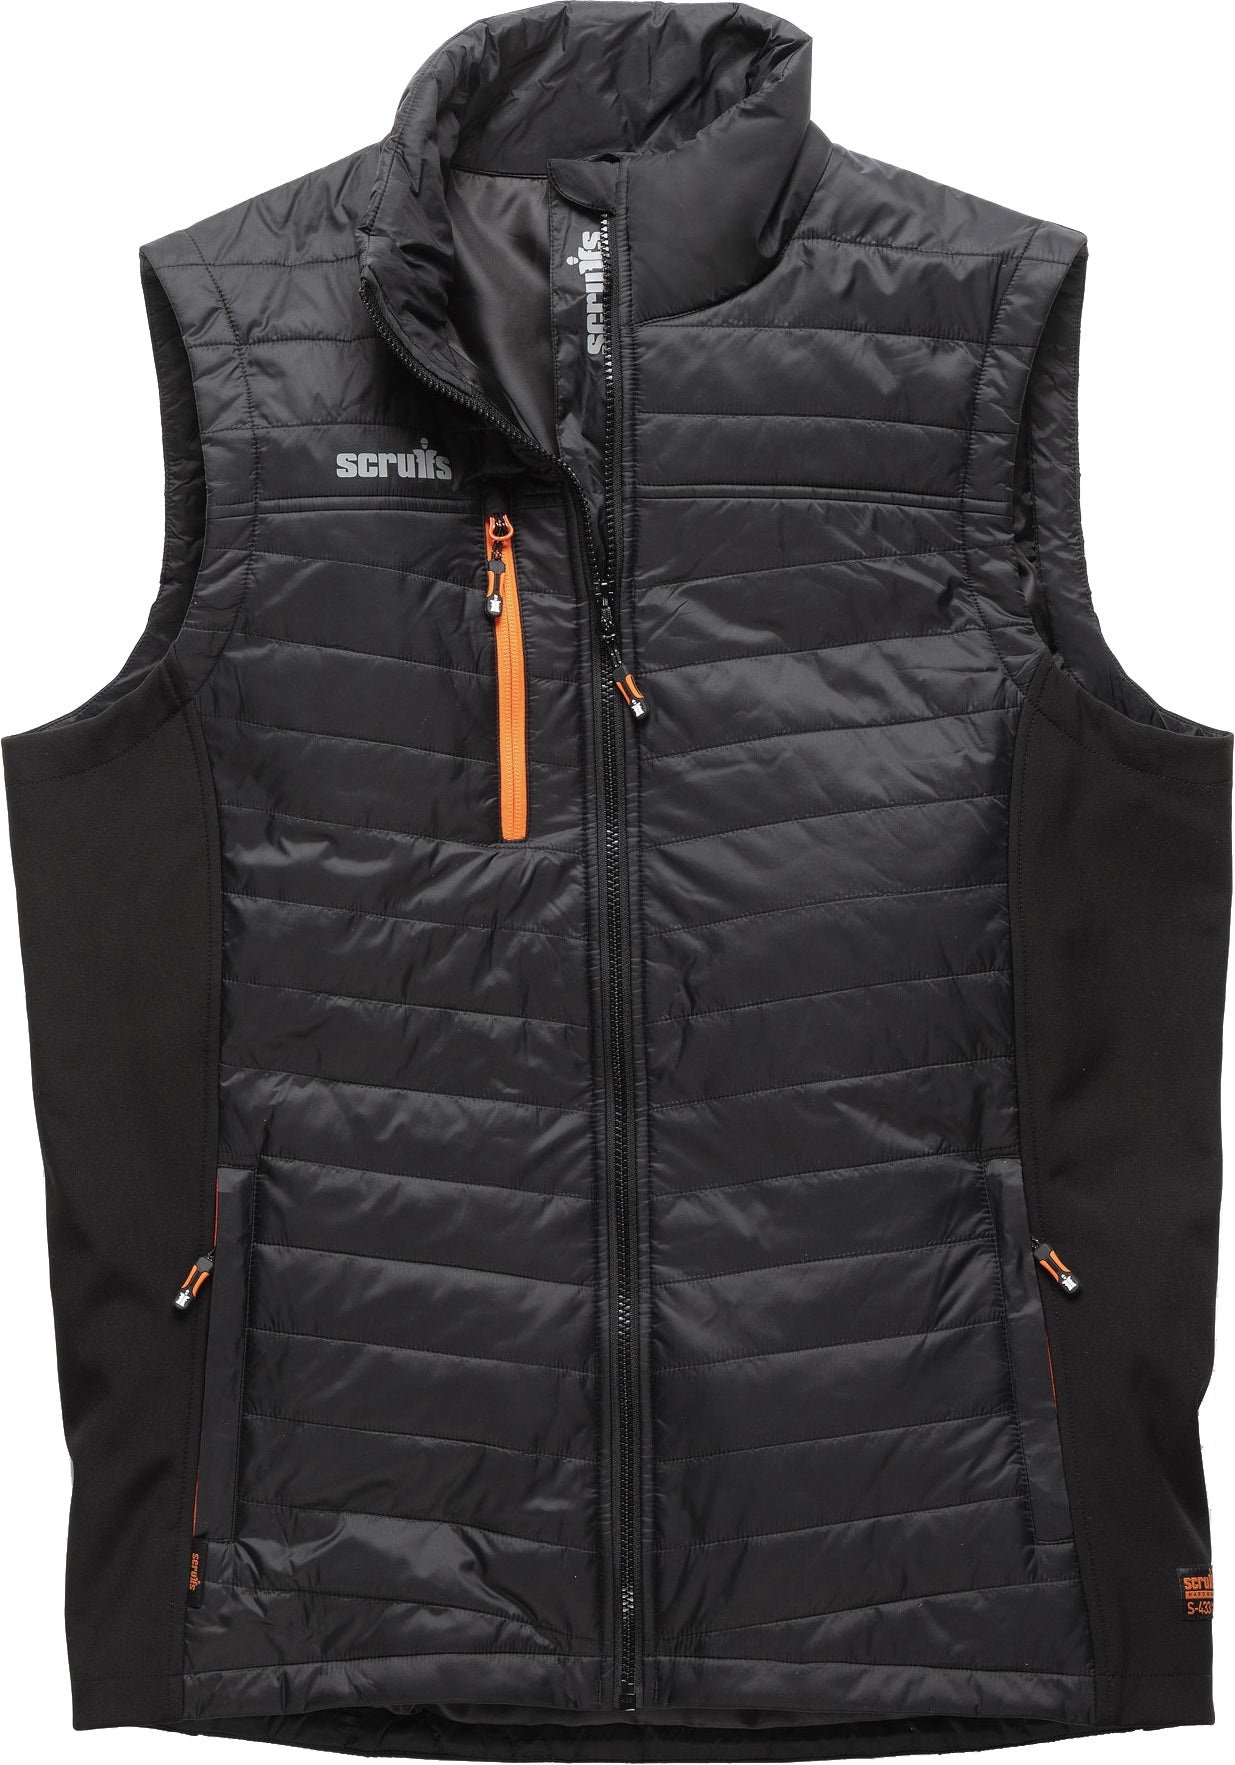 SCRUFFS Trade Bodywarmer - Various Sizes Available